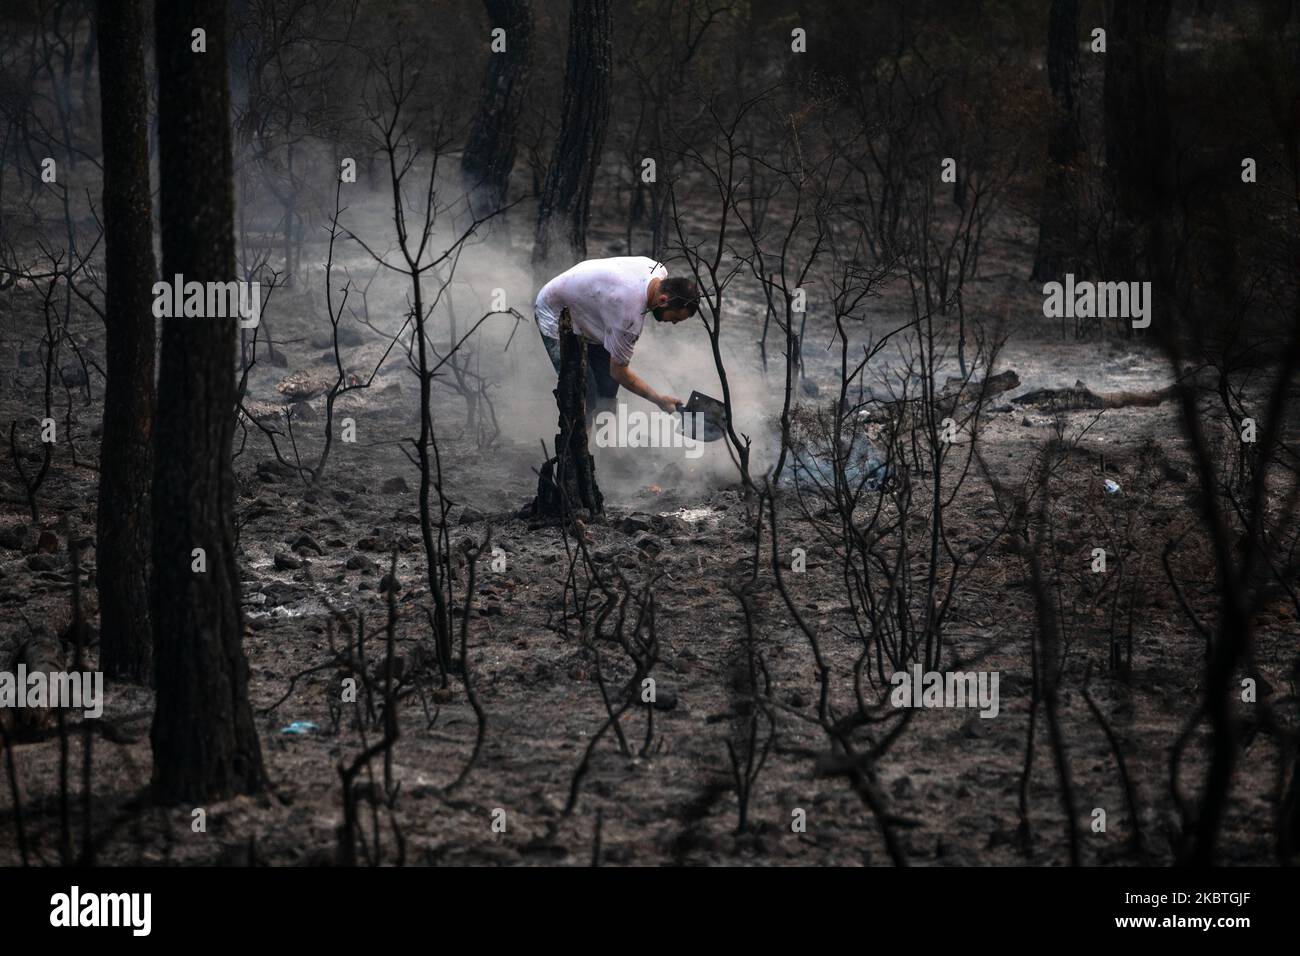 The fire that broke out at two different points in the forest area in Heybeliada, was taken under control. The fire was intervened by the Forest District Directorate Fire Brigade, Istanbul Metropolitan Municipality Fire and War School personnel and equipment, and 2 helicopters. Citizens also supported the extinguishing works in Istanbul, Turkey on July 12, 2020. (Photo by Onur Dogman/NurPhoto) Stock Photo